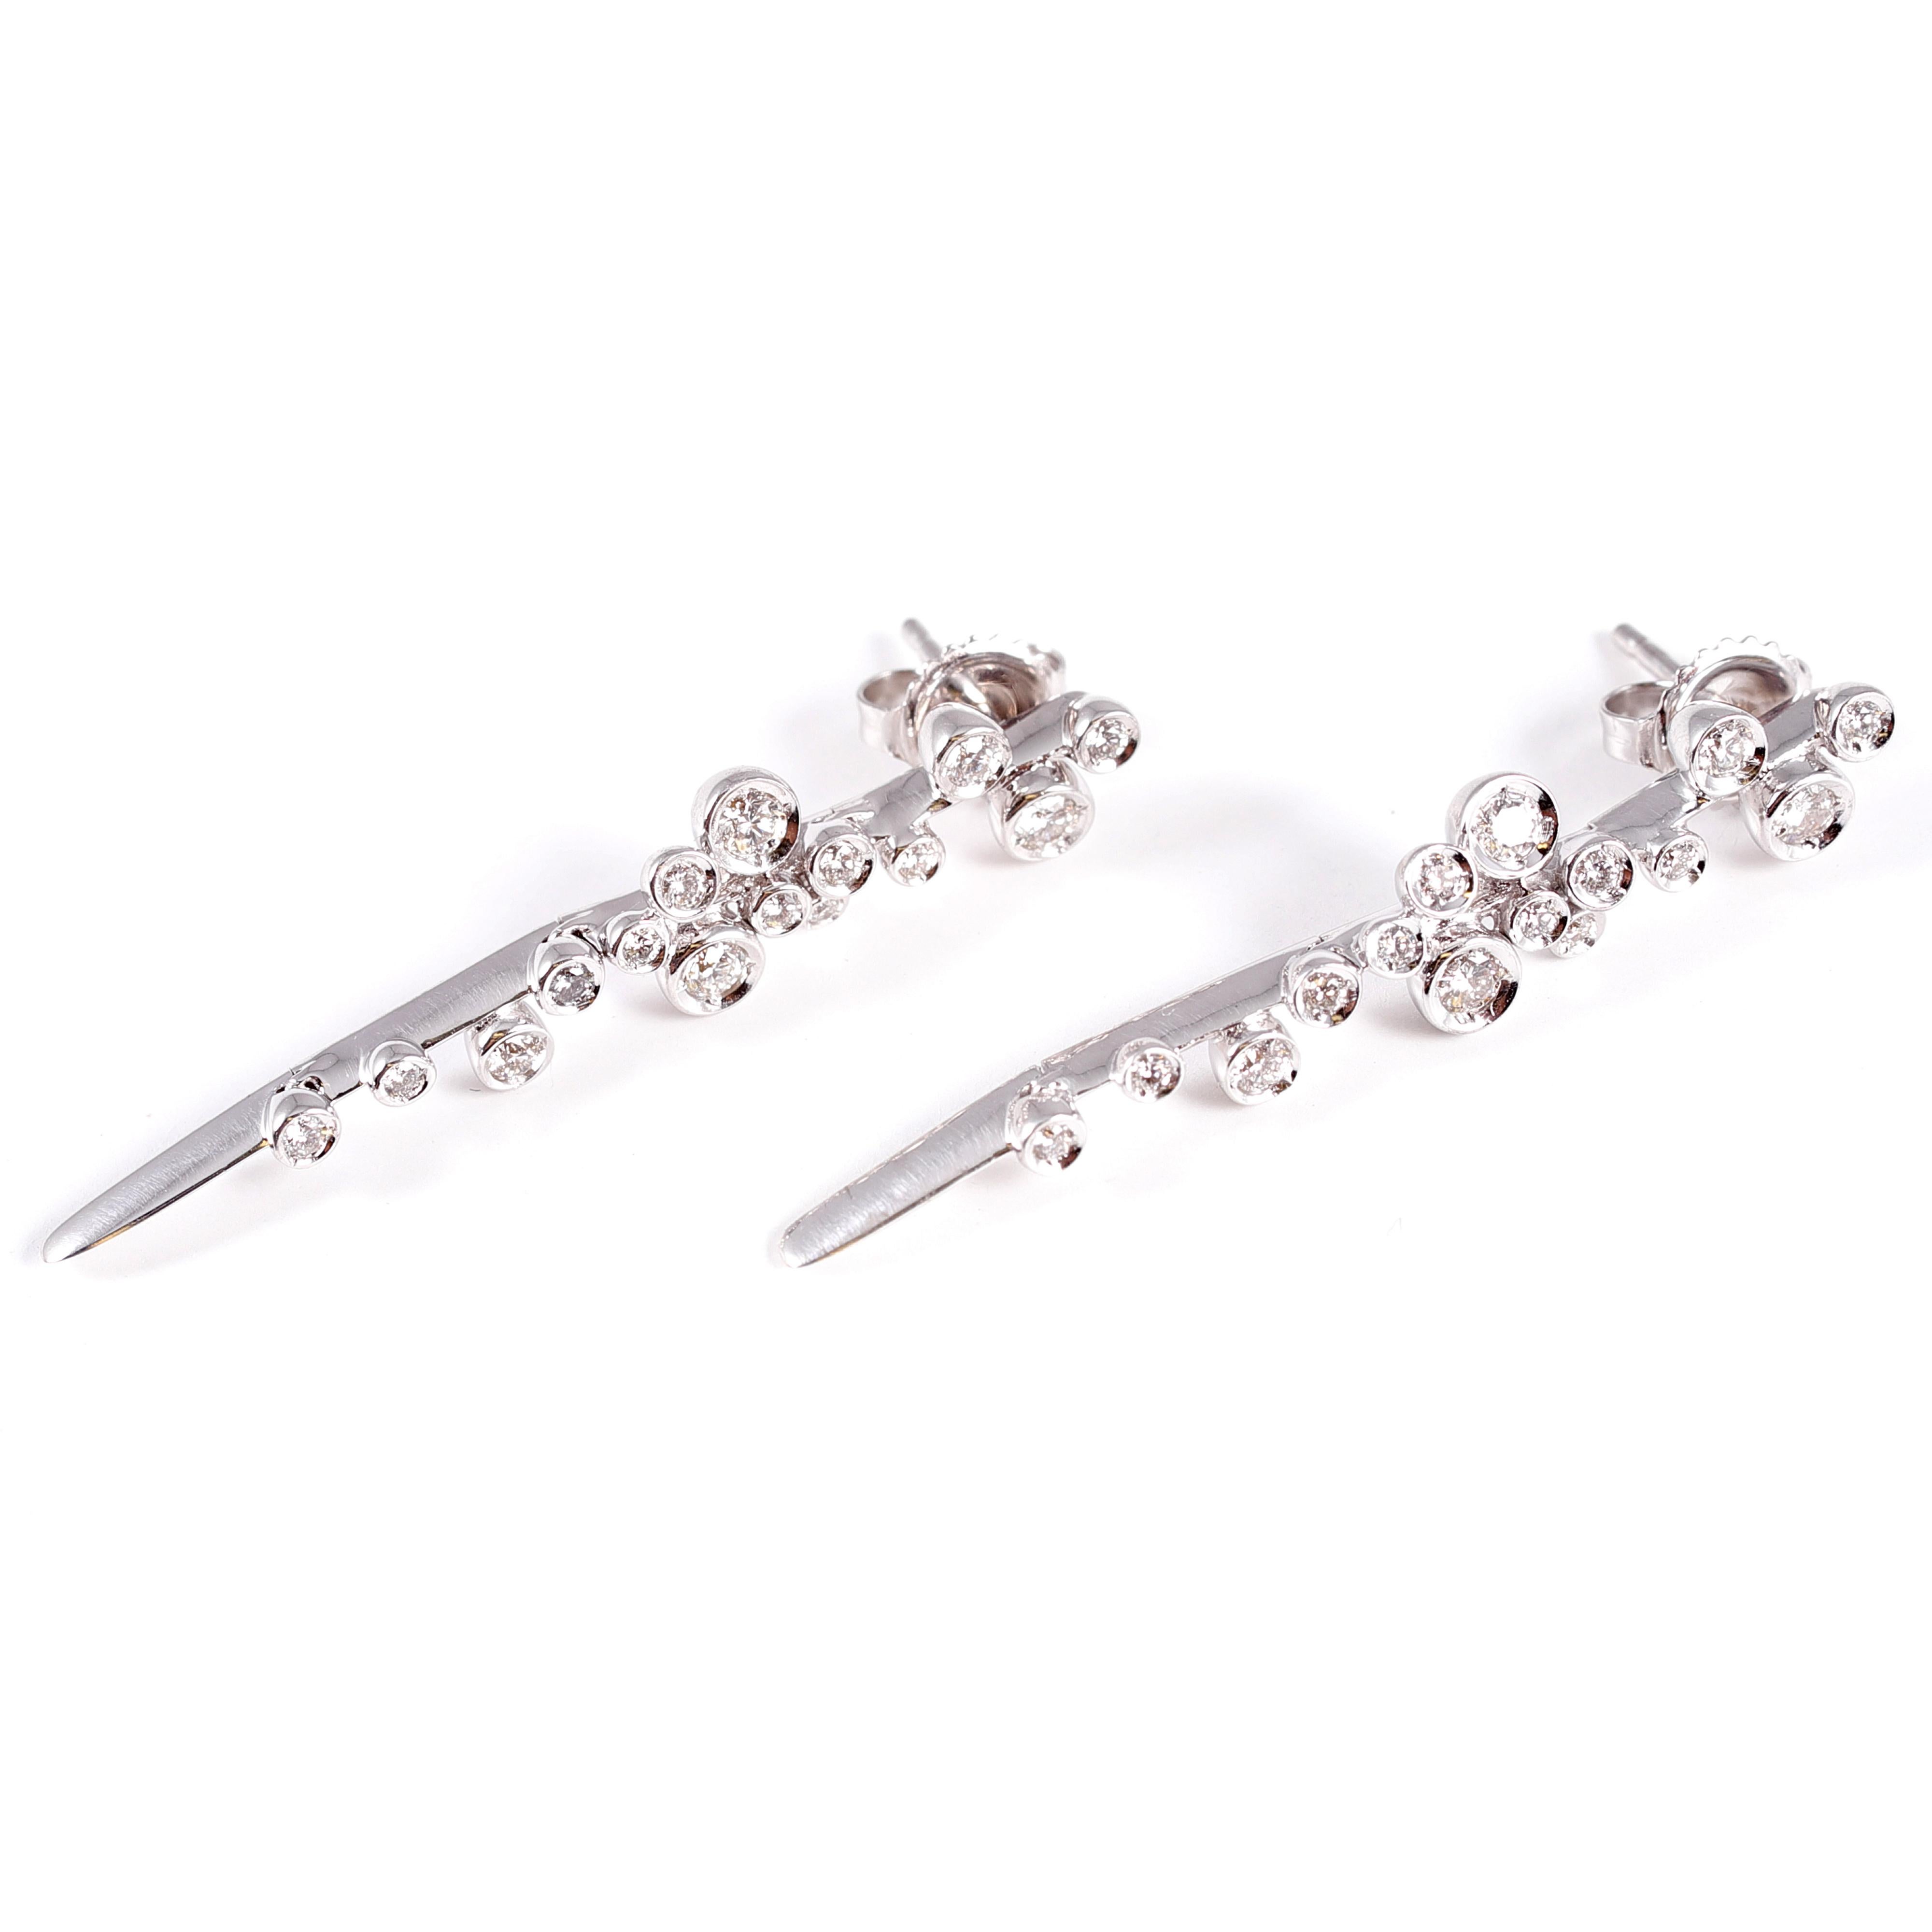 David Morris 0.60 Carat Diamond Earrings from The Astral Collection 1